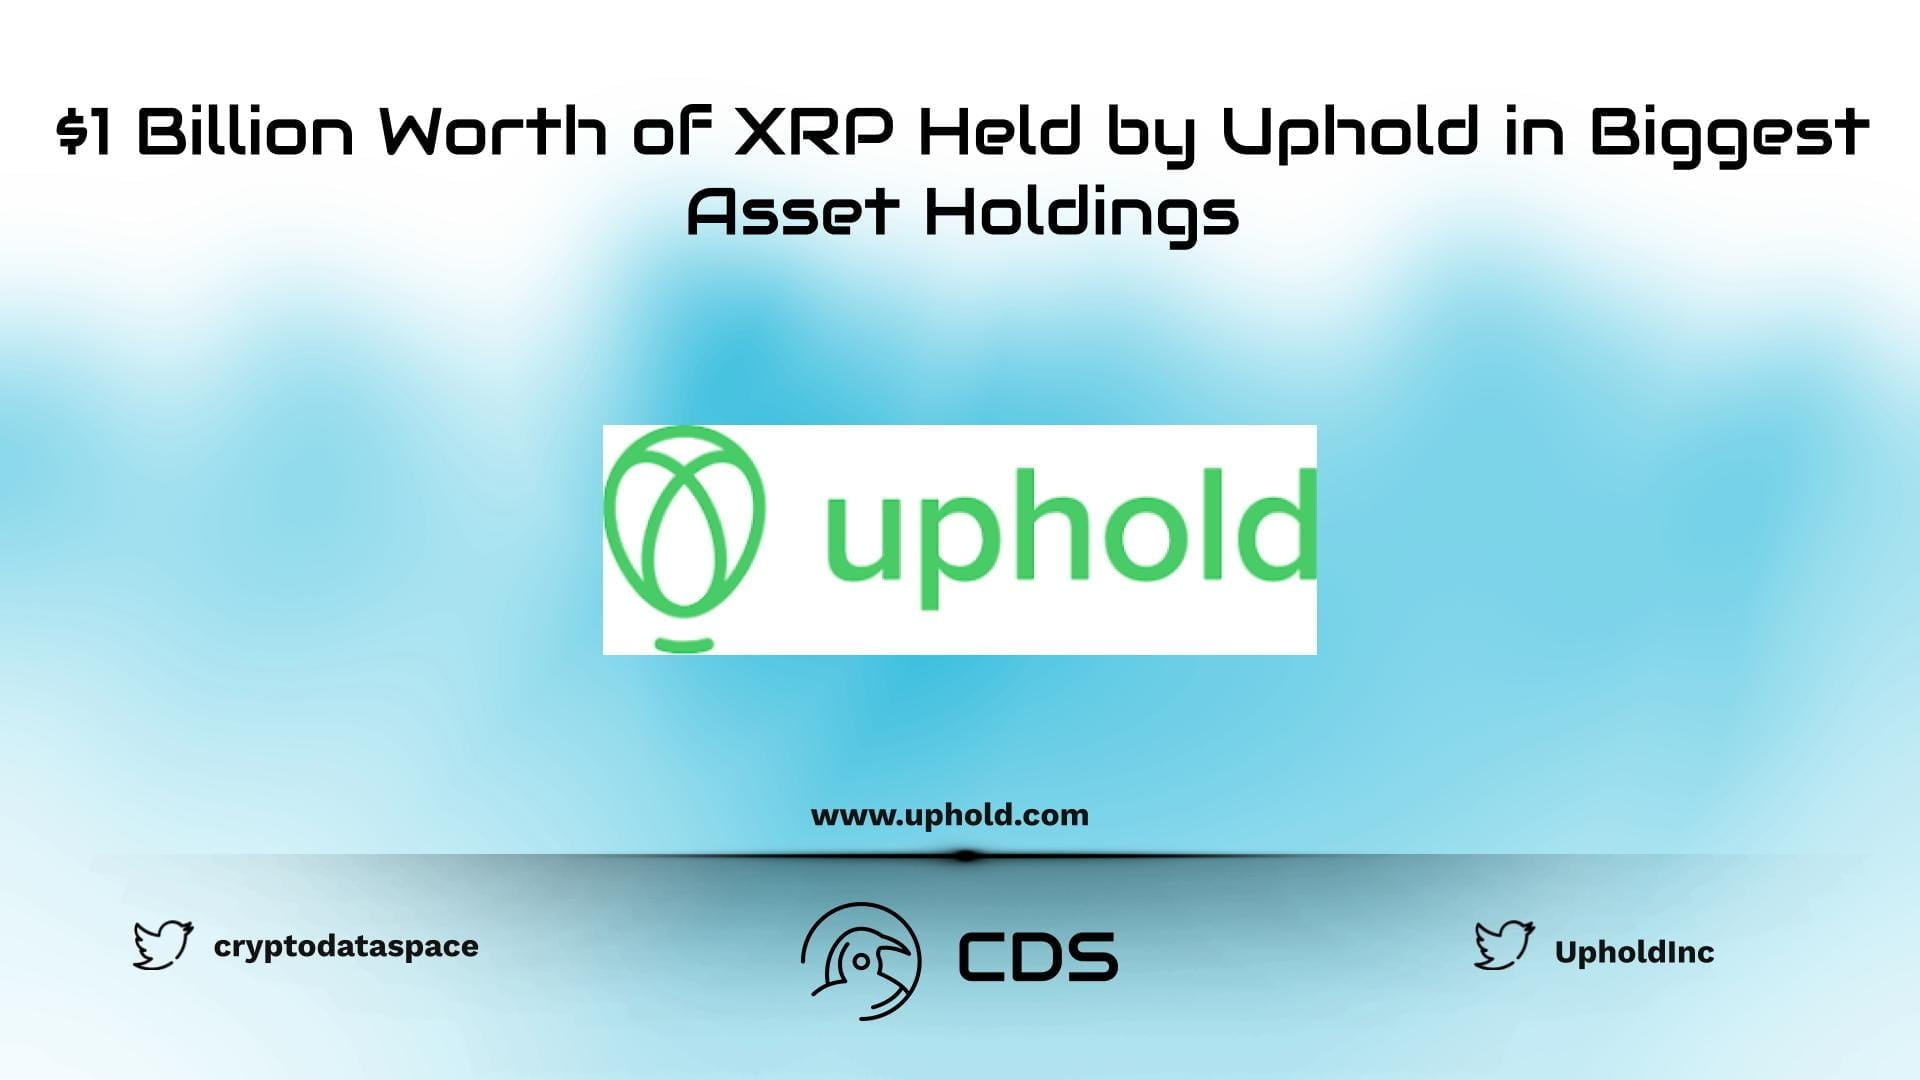 $1 Billion Worth of XRP Held by Uphold in Biggest Asset Holdings